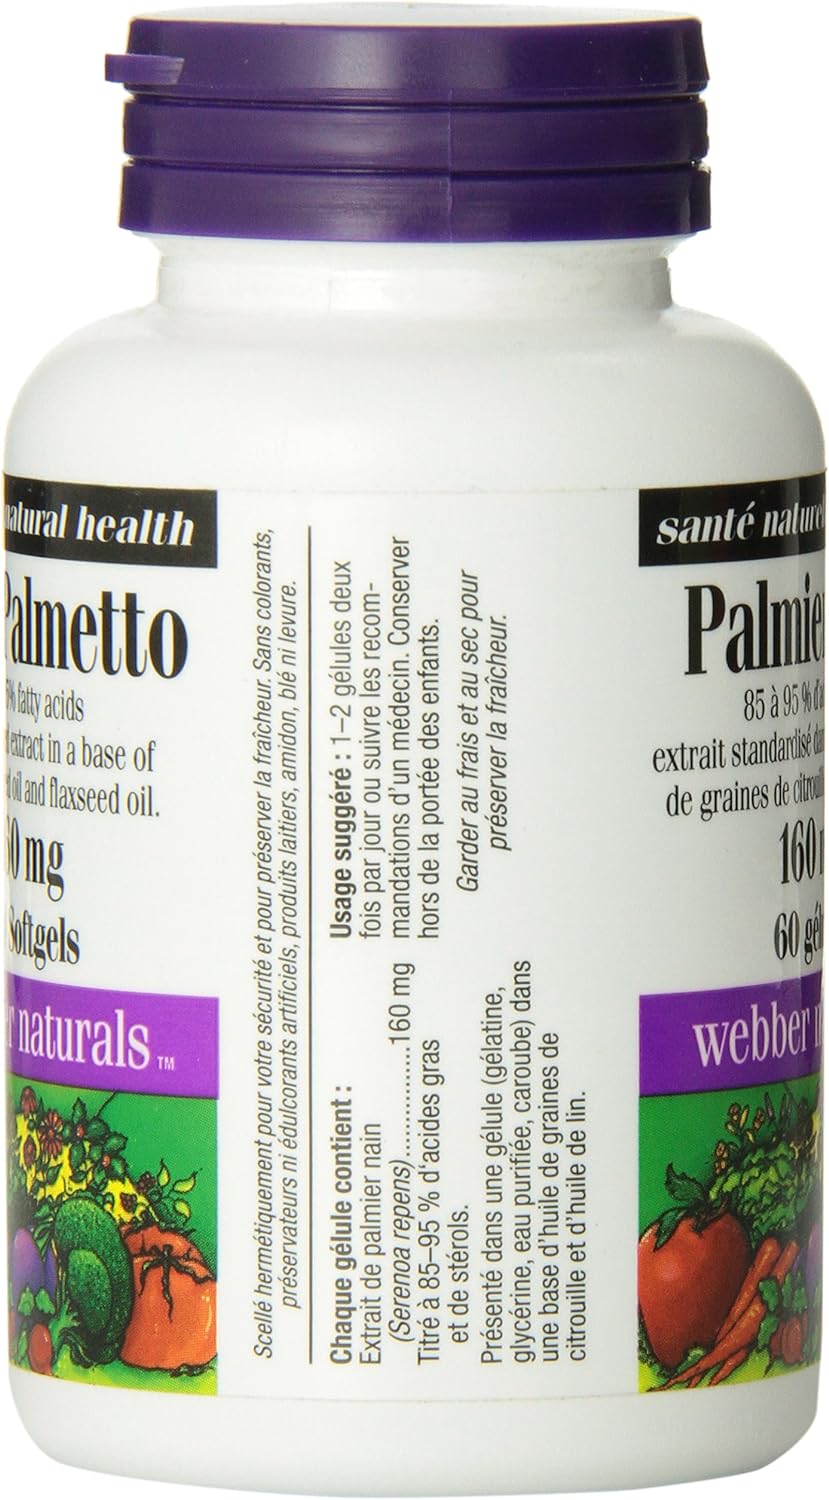 Saw Palmetto Extract 160mg, 60 softgels